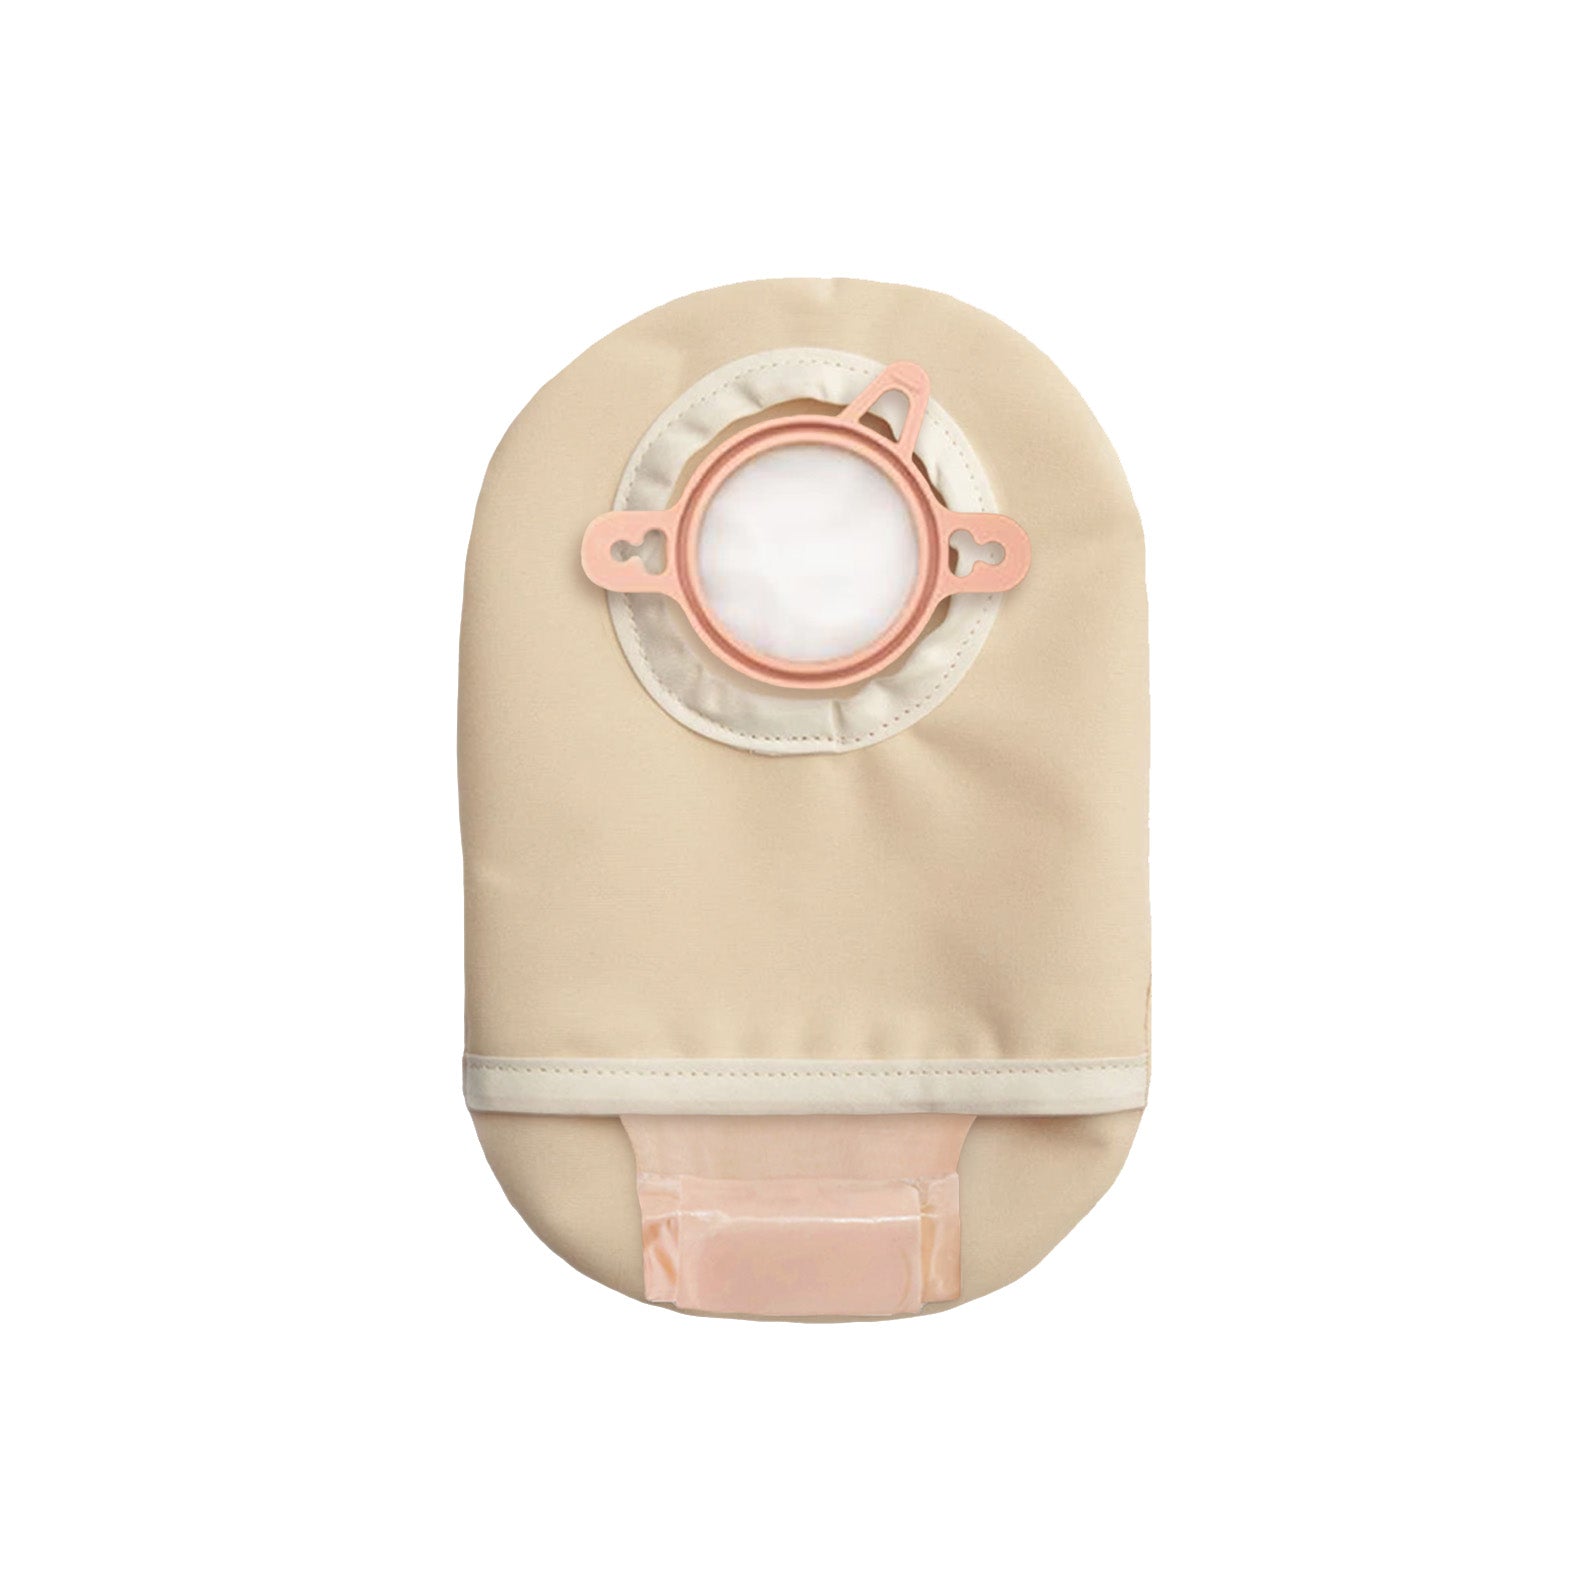 C&S Quick Dry White Terry Ostomy Pouch Cover